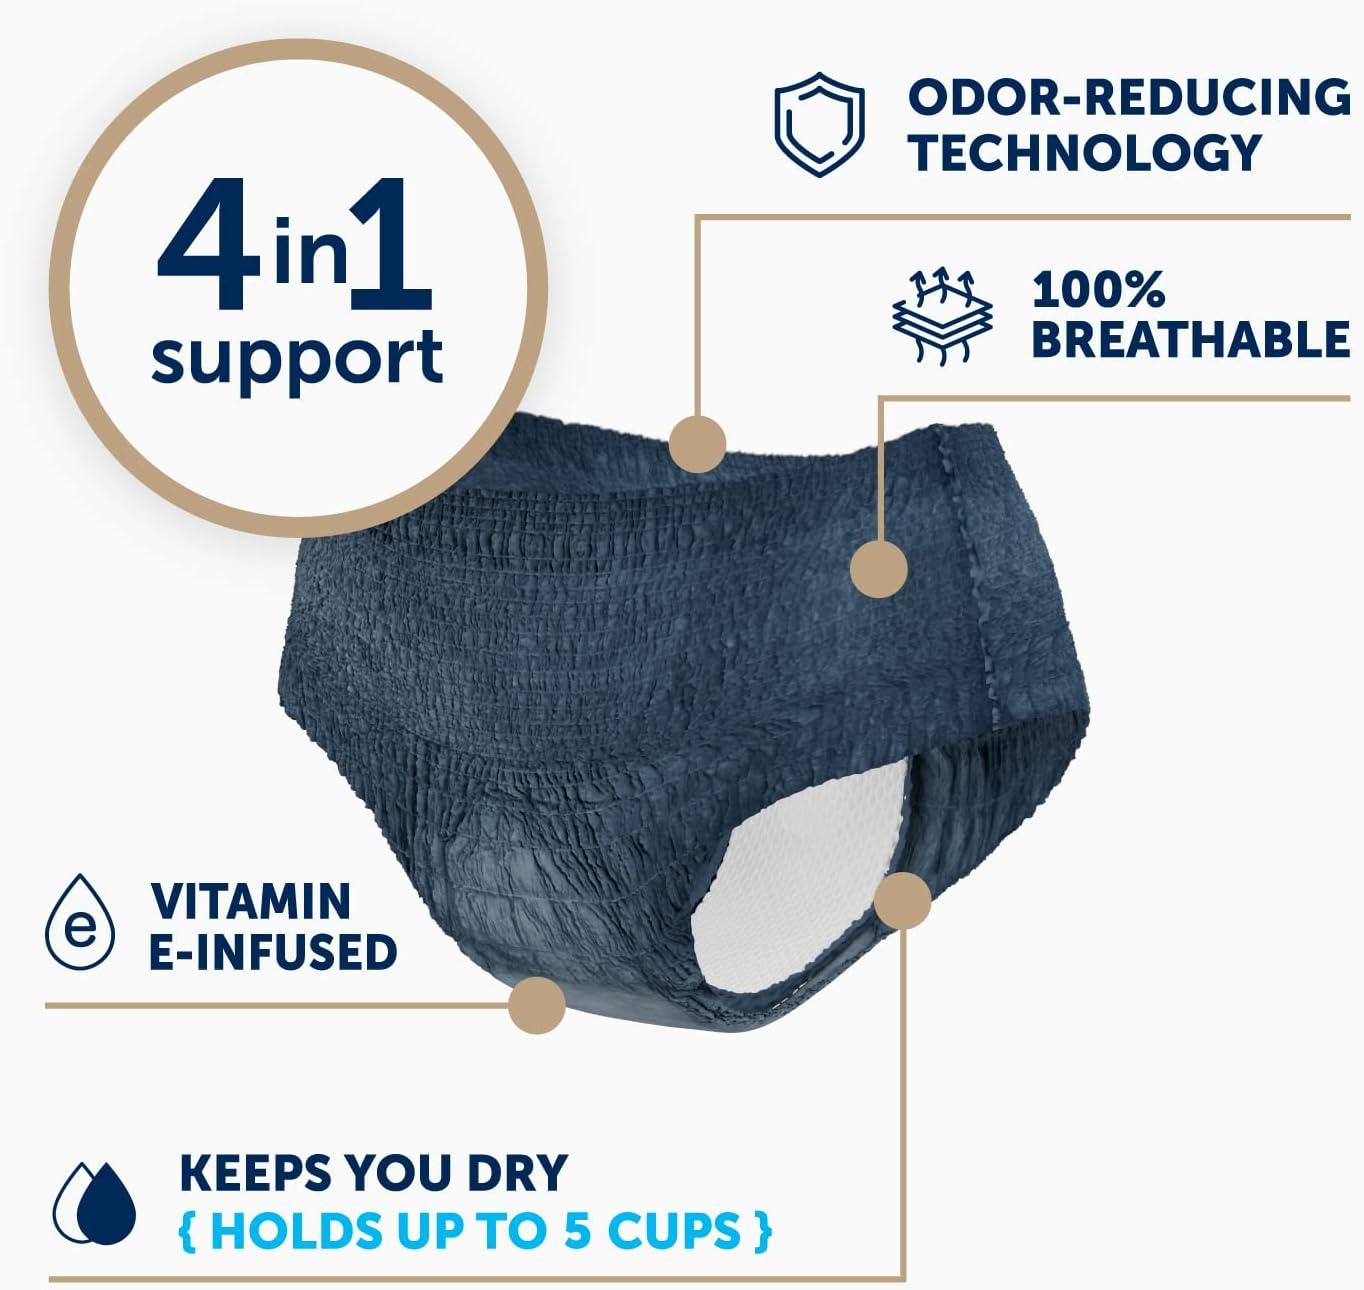 5-Pack Disposable, Postpartum and Incontinence Underwear